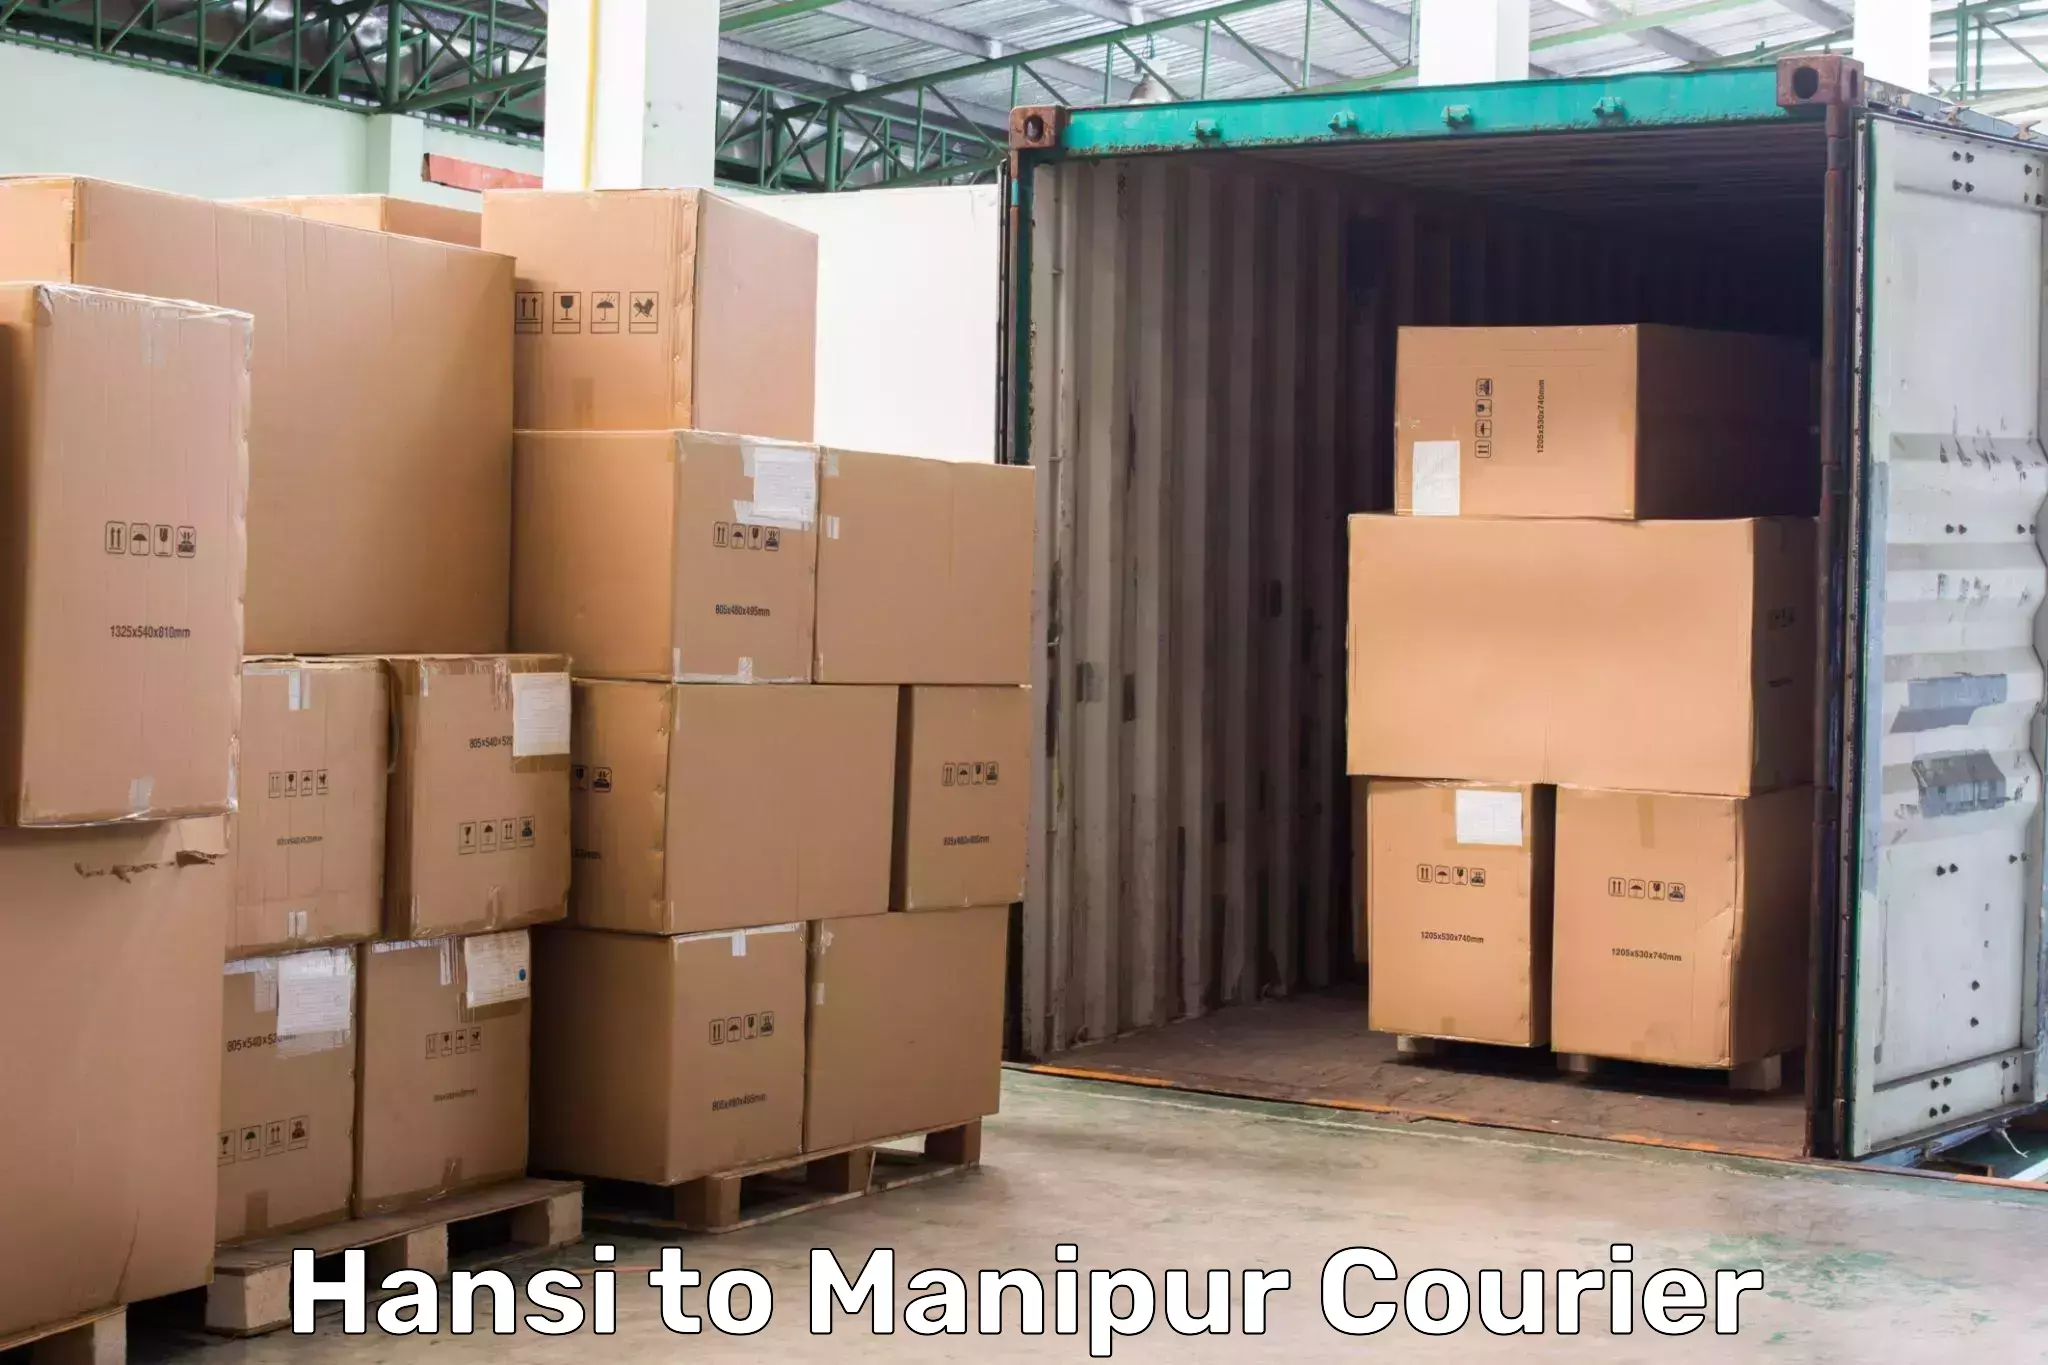 Global shipping networks Hansi to Manipur